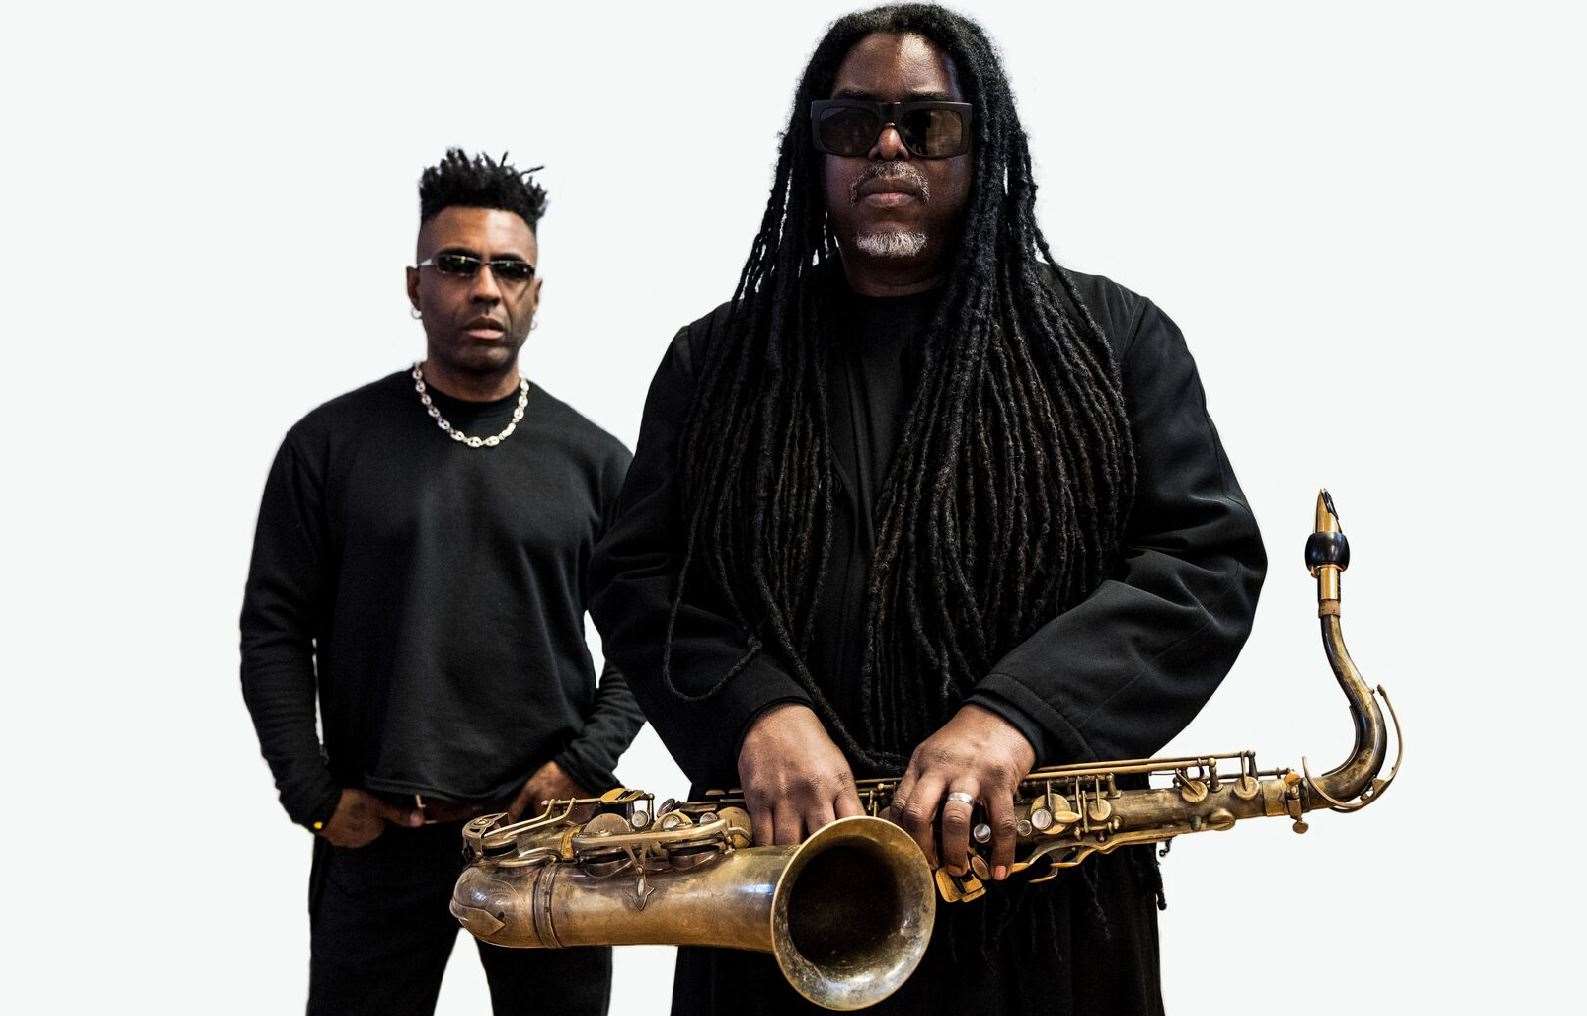 Courtney Pine and Omar will be at the Hever Festival